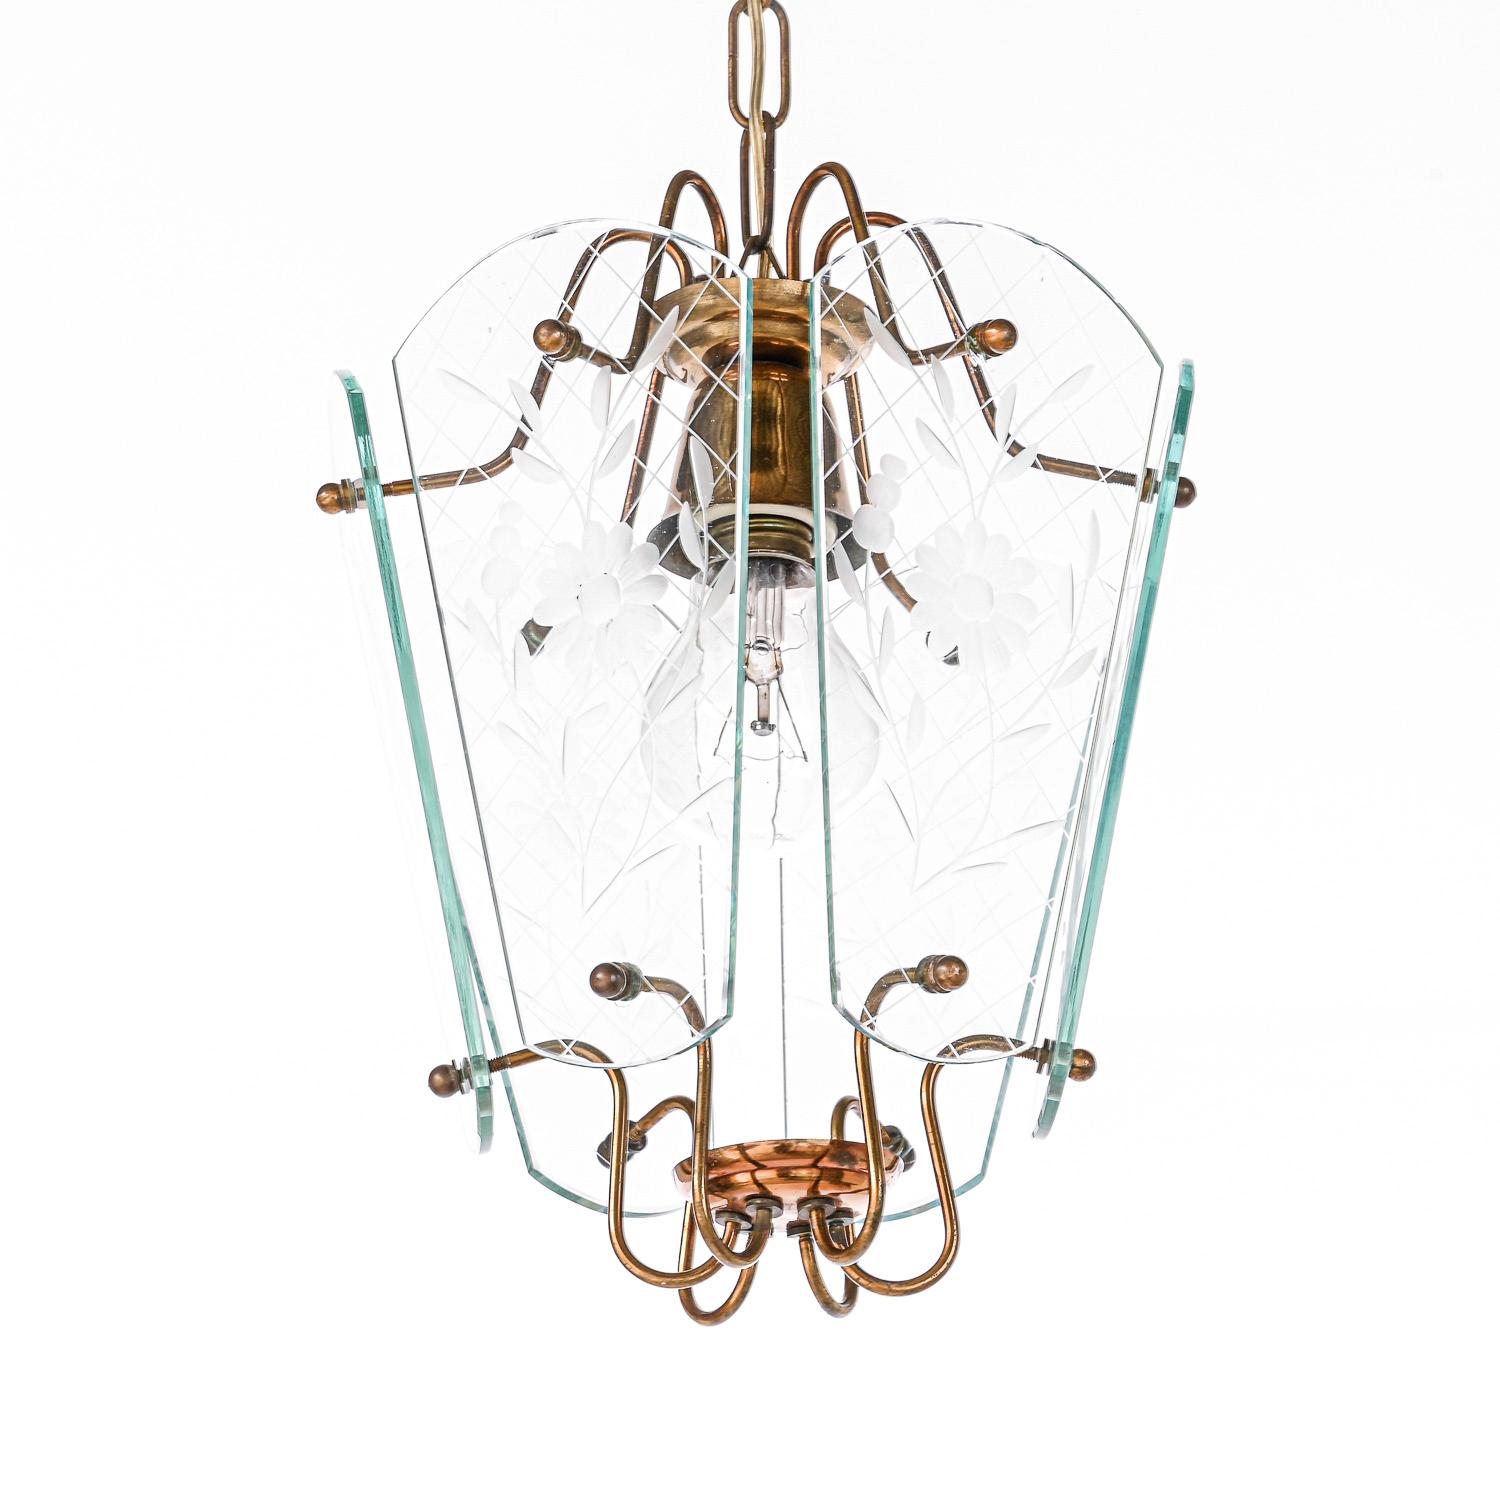 Beautiful Classic lantern with 6 glass panels engraved with a flower and stem. The delicate feel comes from the nicely decorated brass frame. It has a small chip in the glas panel by the screw, hardly to be seen.